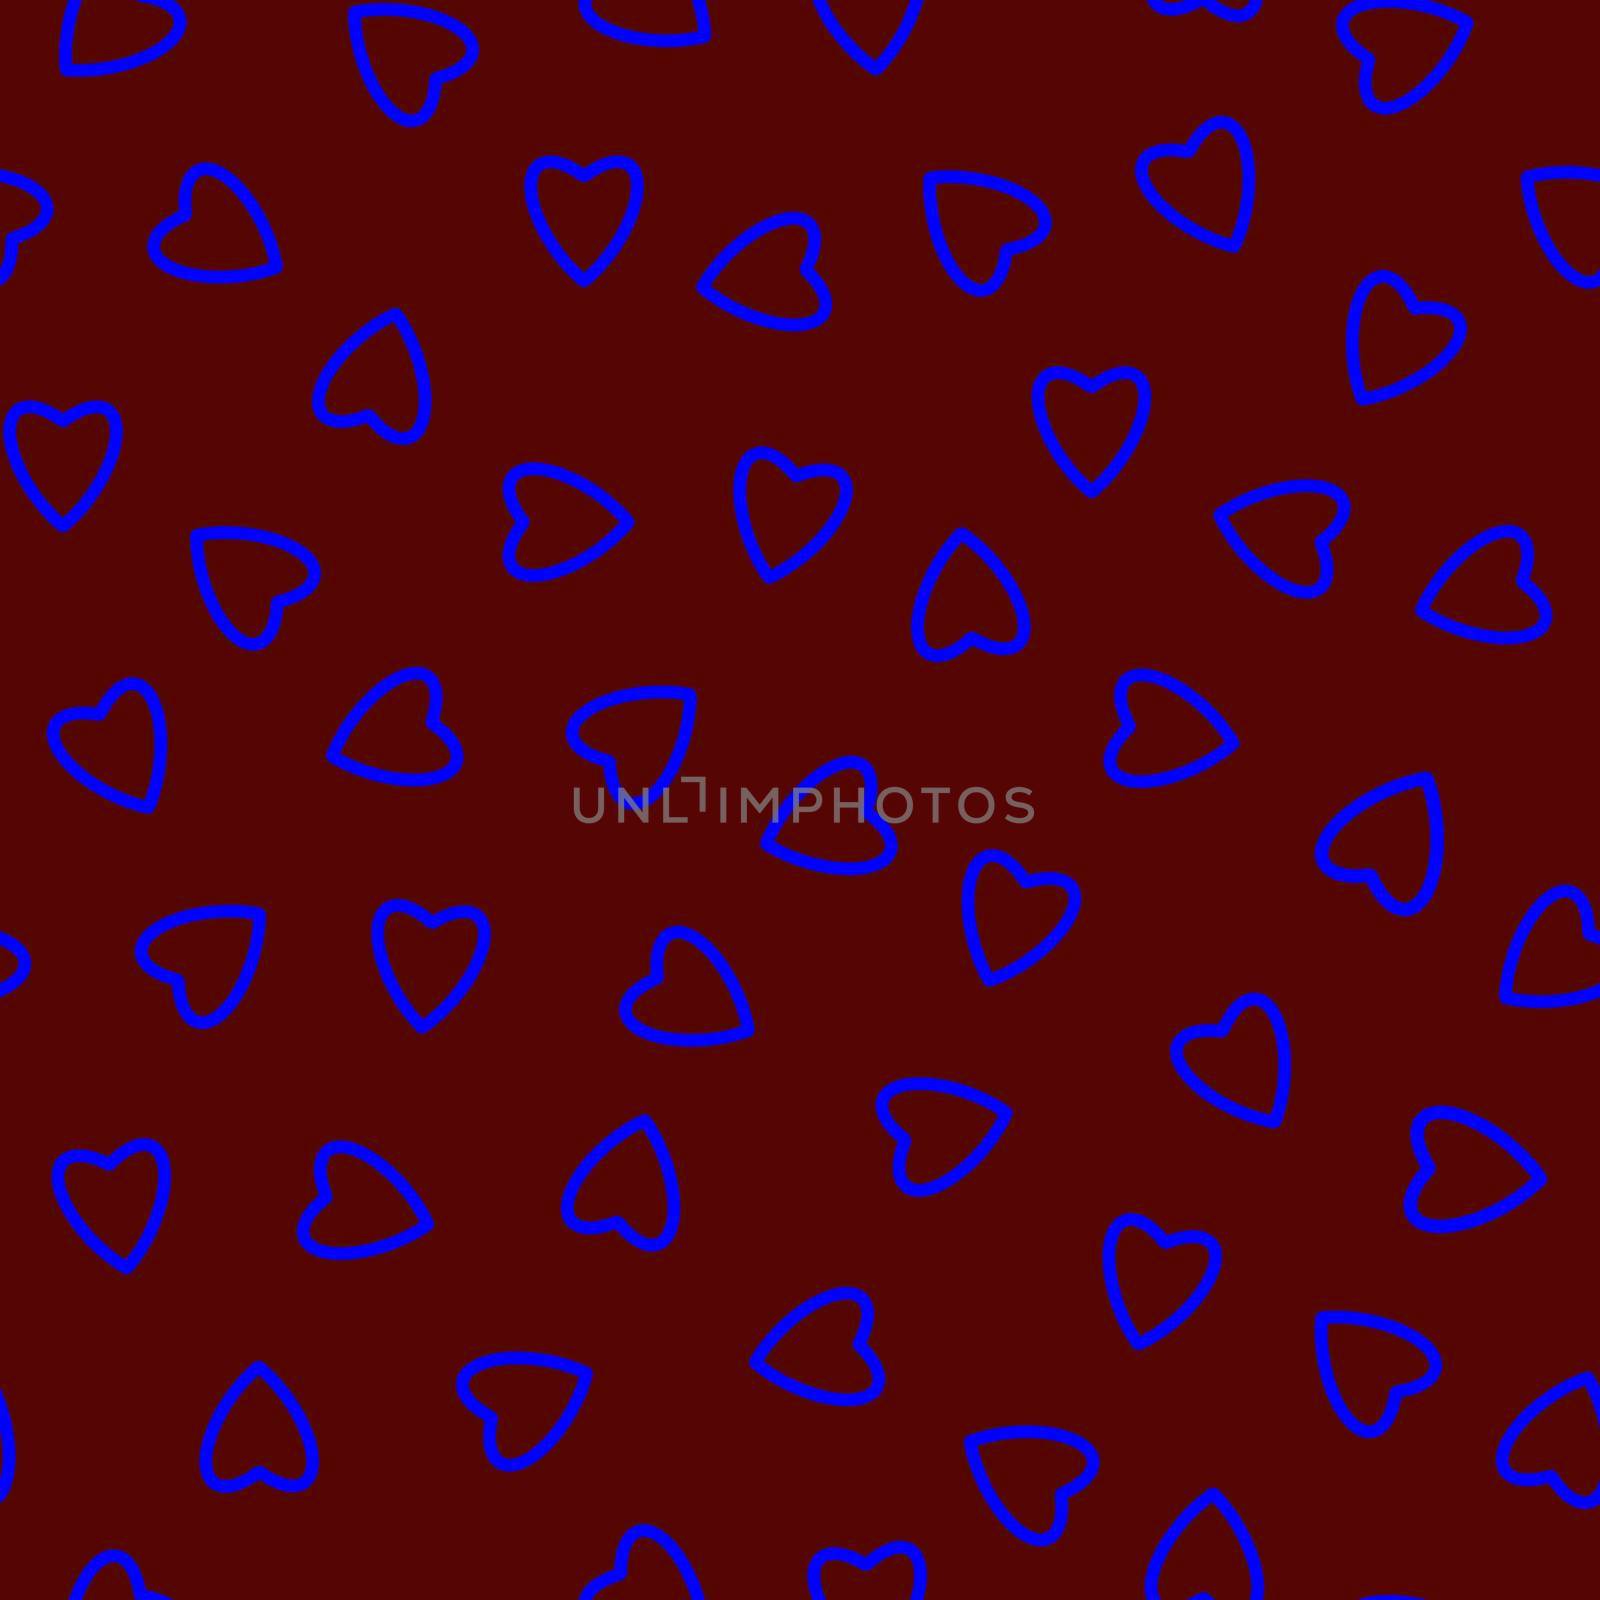 Simple hearts seamless pattern,endless chaotic texture made of tiny heart silhouettes.Valentines,mothers day background.Blue on burgundy.Great for Easter,wedding,scrapbook,gift wrapping paper,textiles